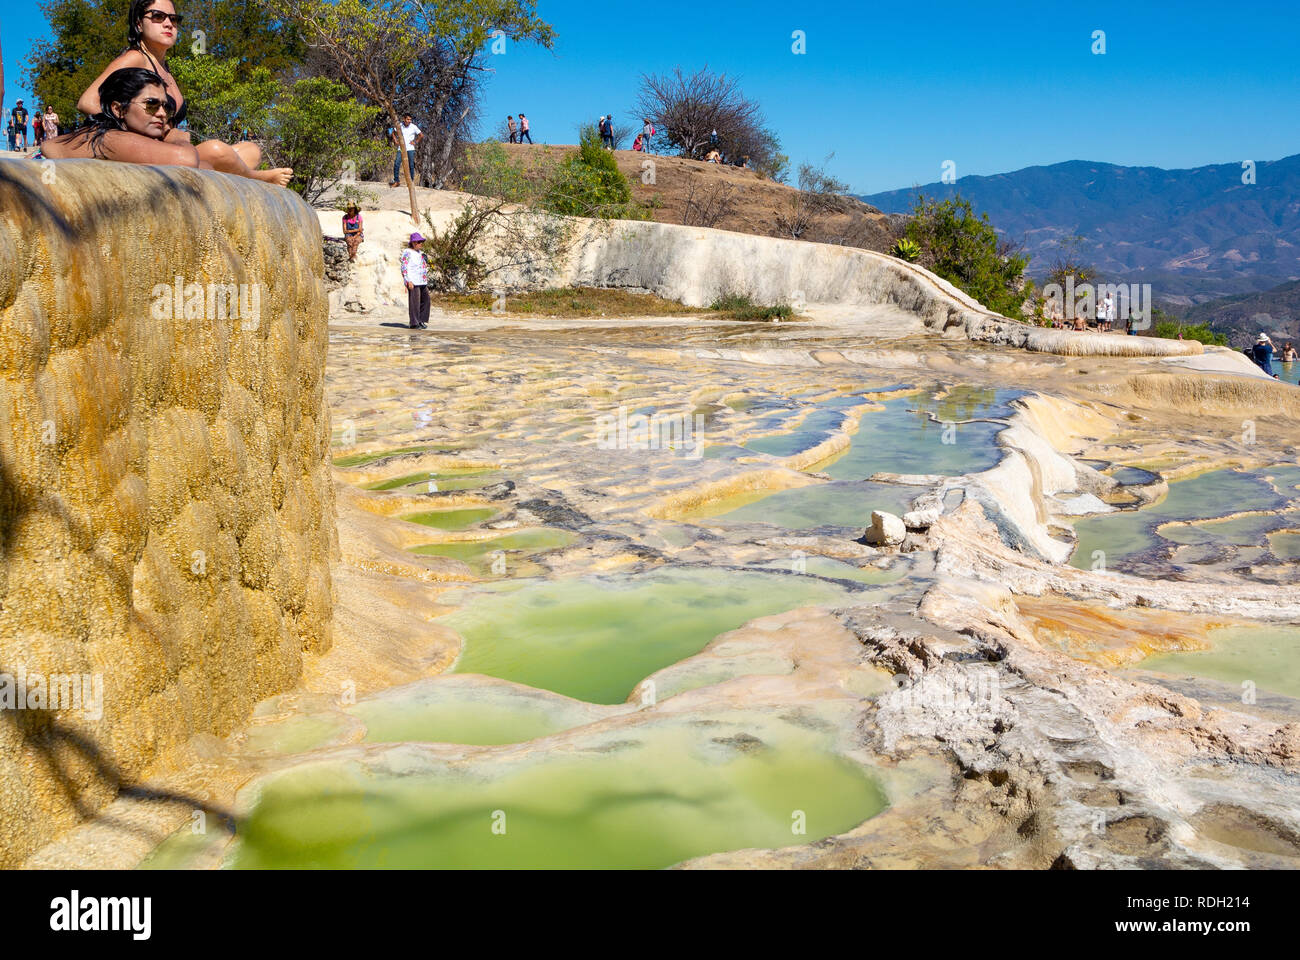 A landscape view of Hierve el Agua with tourists, Petrified waterfall, Oaxaca, Mexico Stock Photo